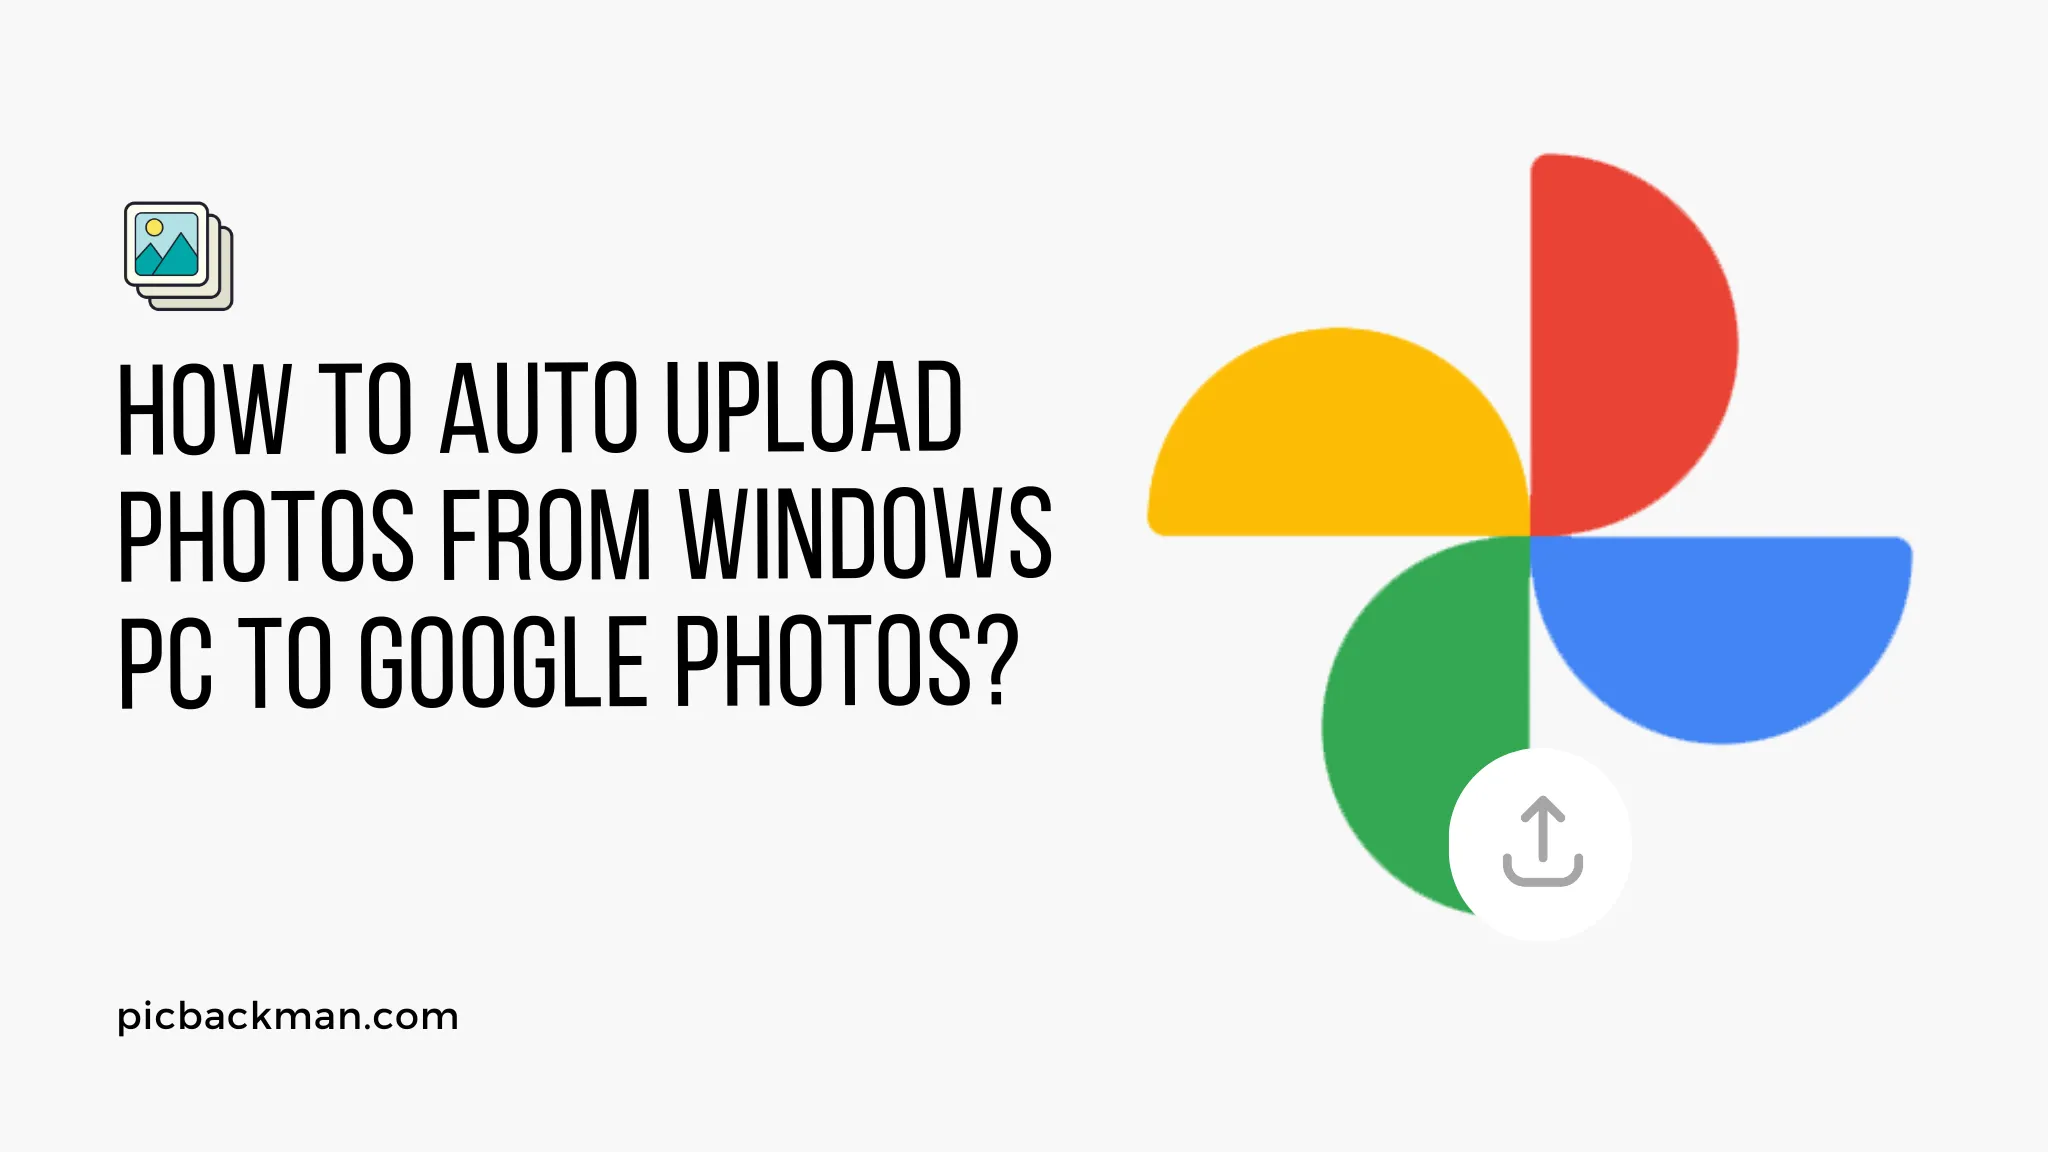 How to Auto Upload Photos from Windows PC to Google Photos